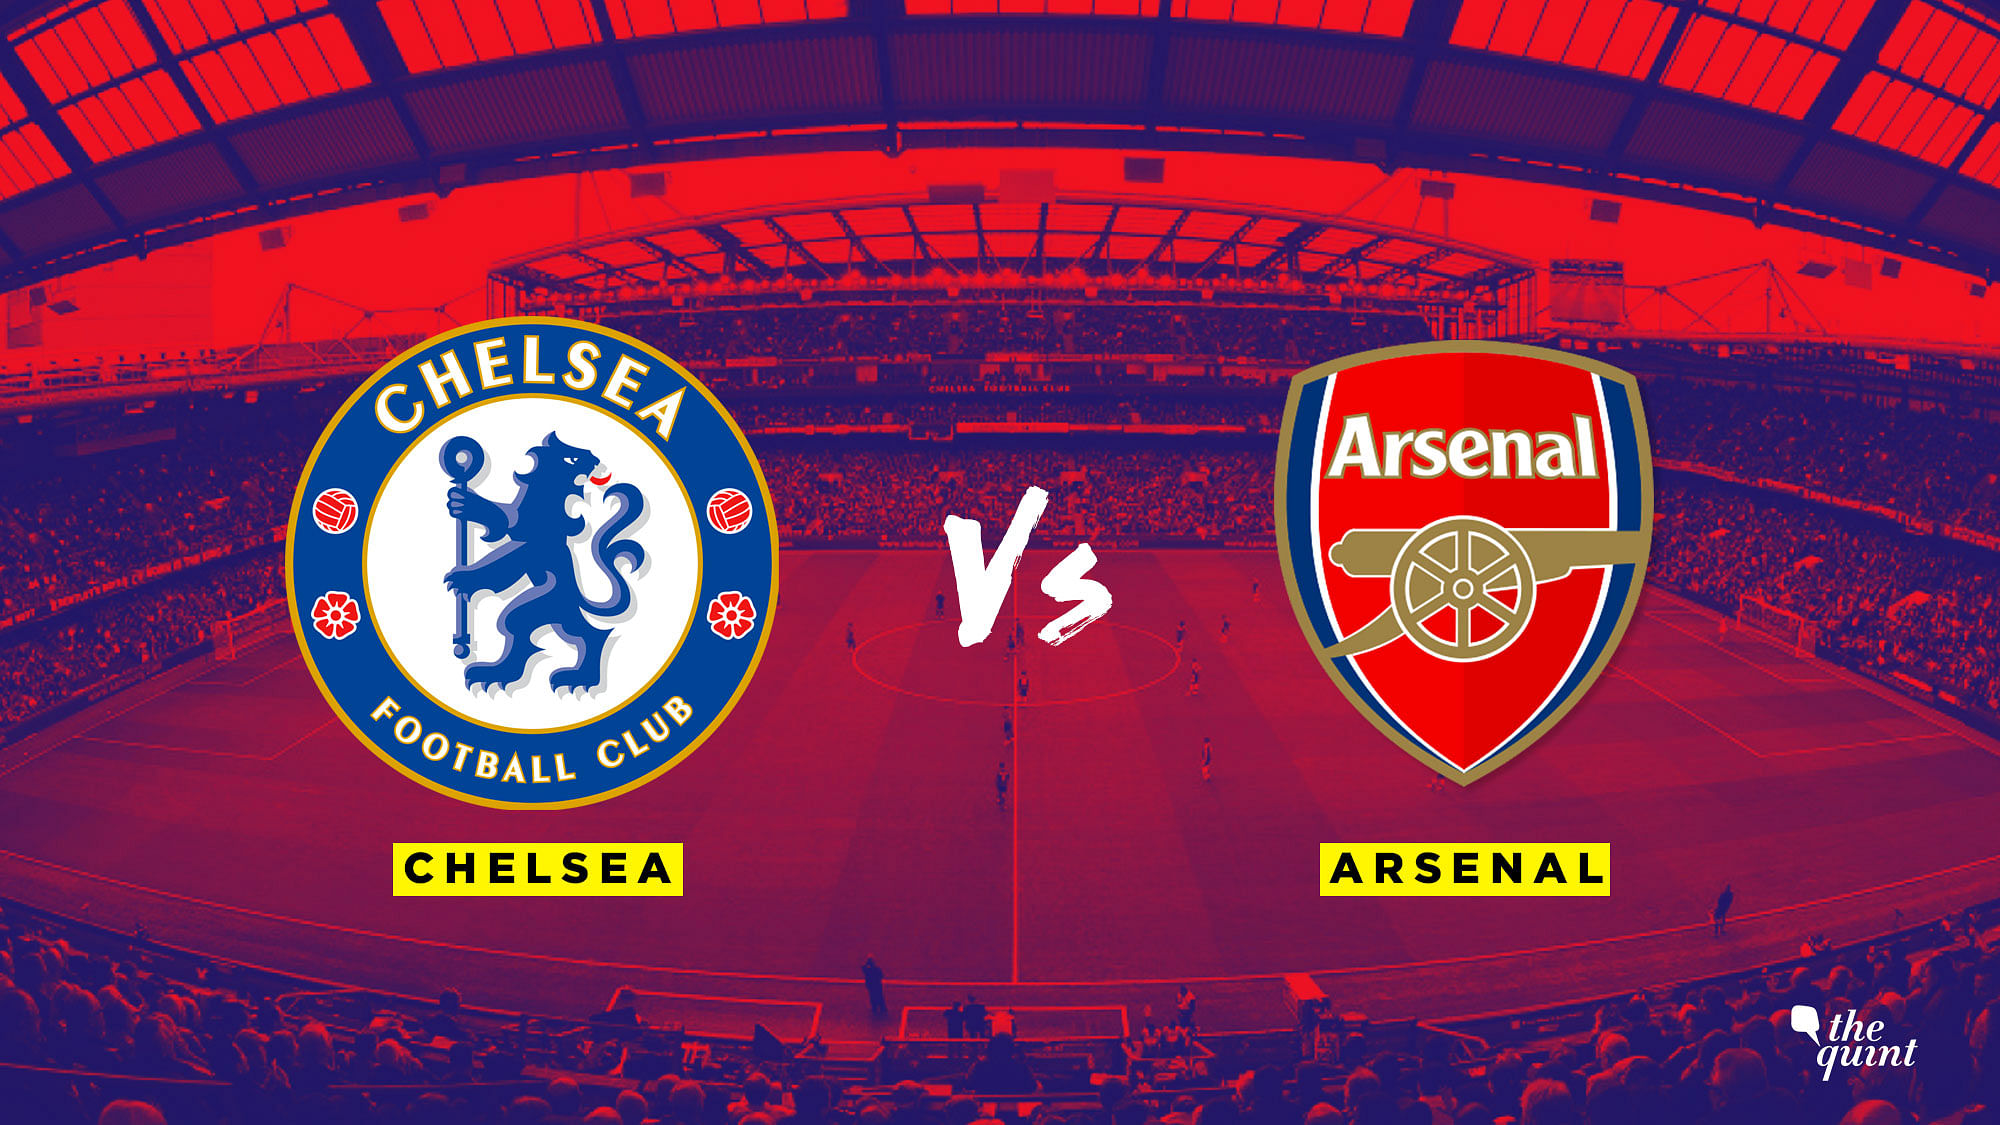 Chelsea will take on Arsenal in the Europa Cup final on Thursday, 30 May in Baku Olympic Stadium.